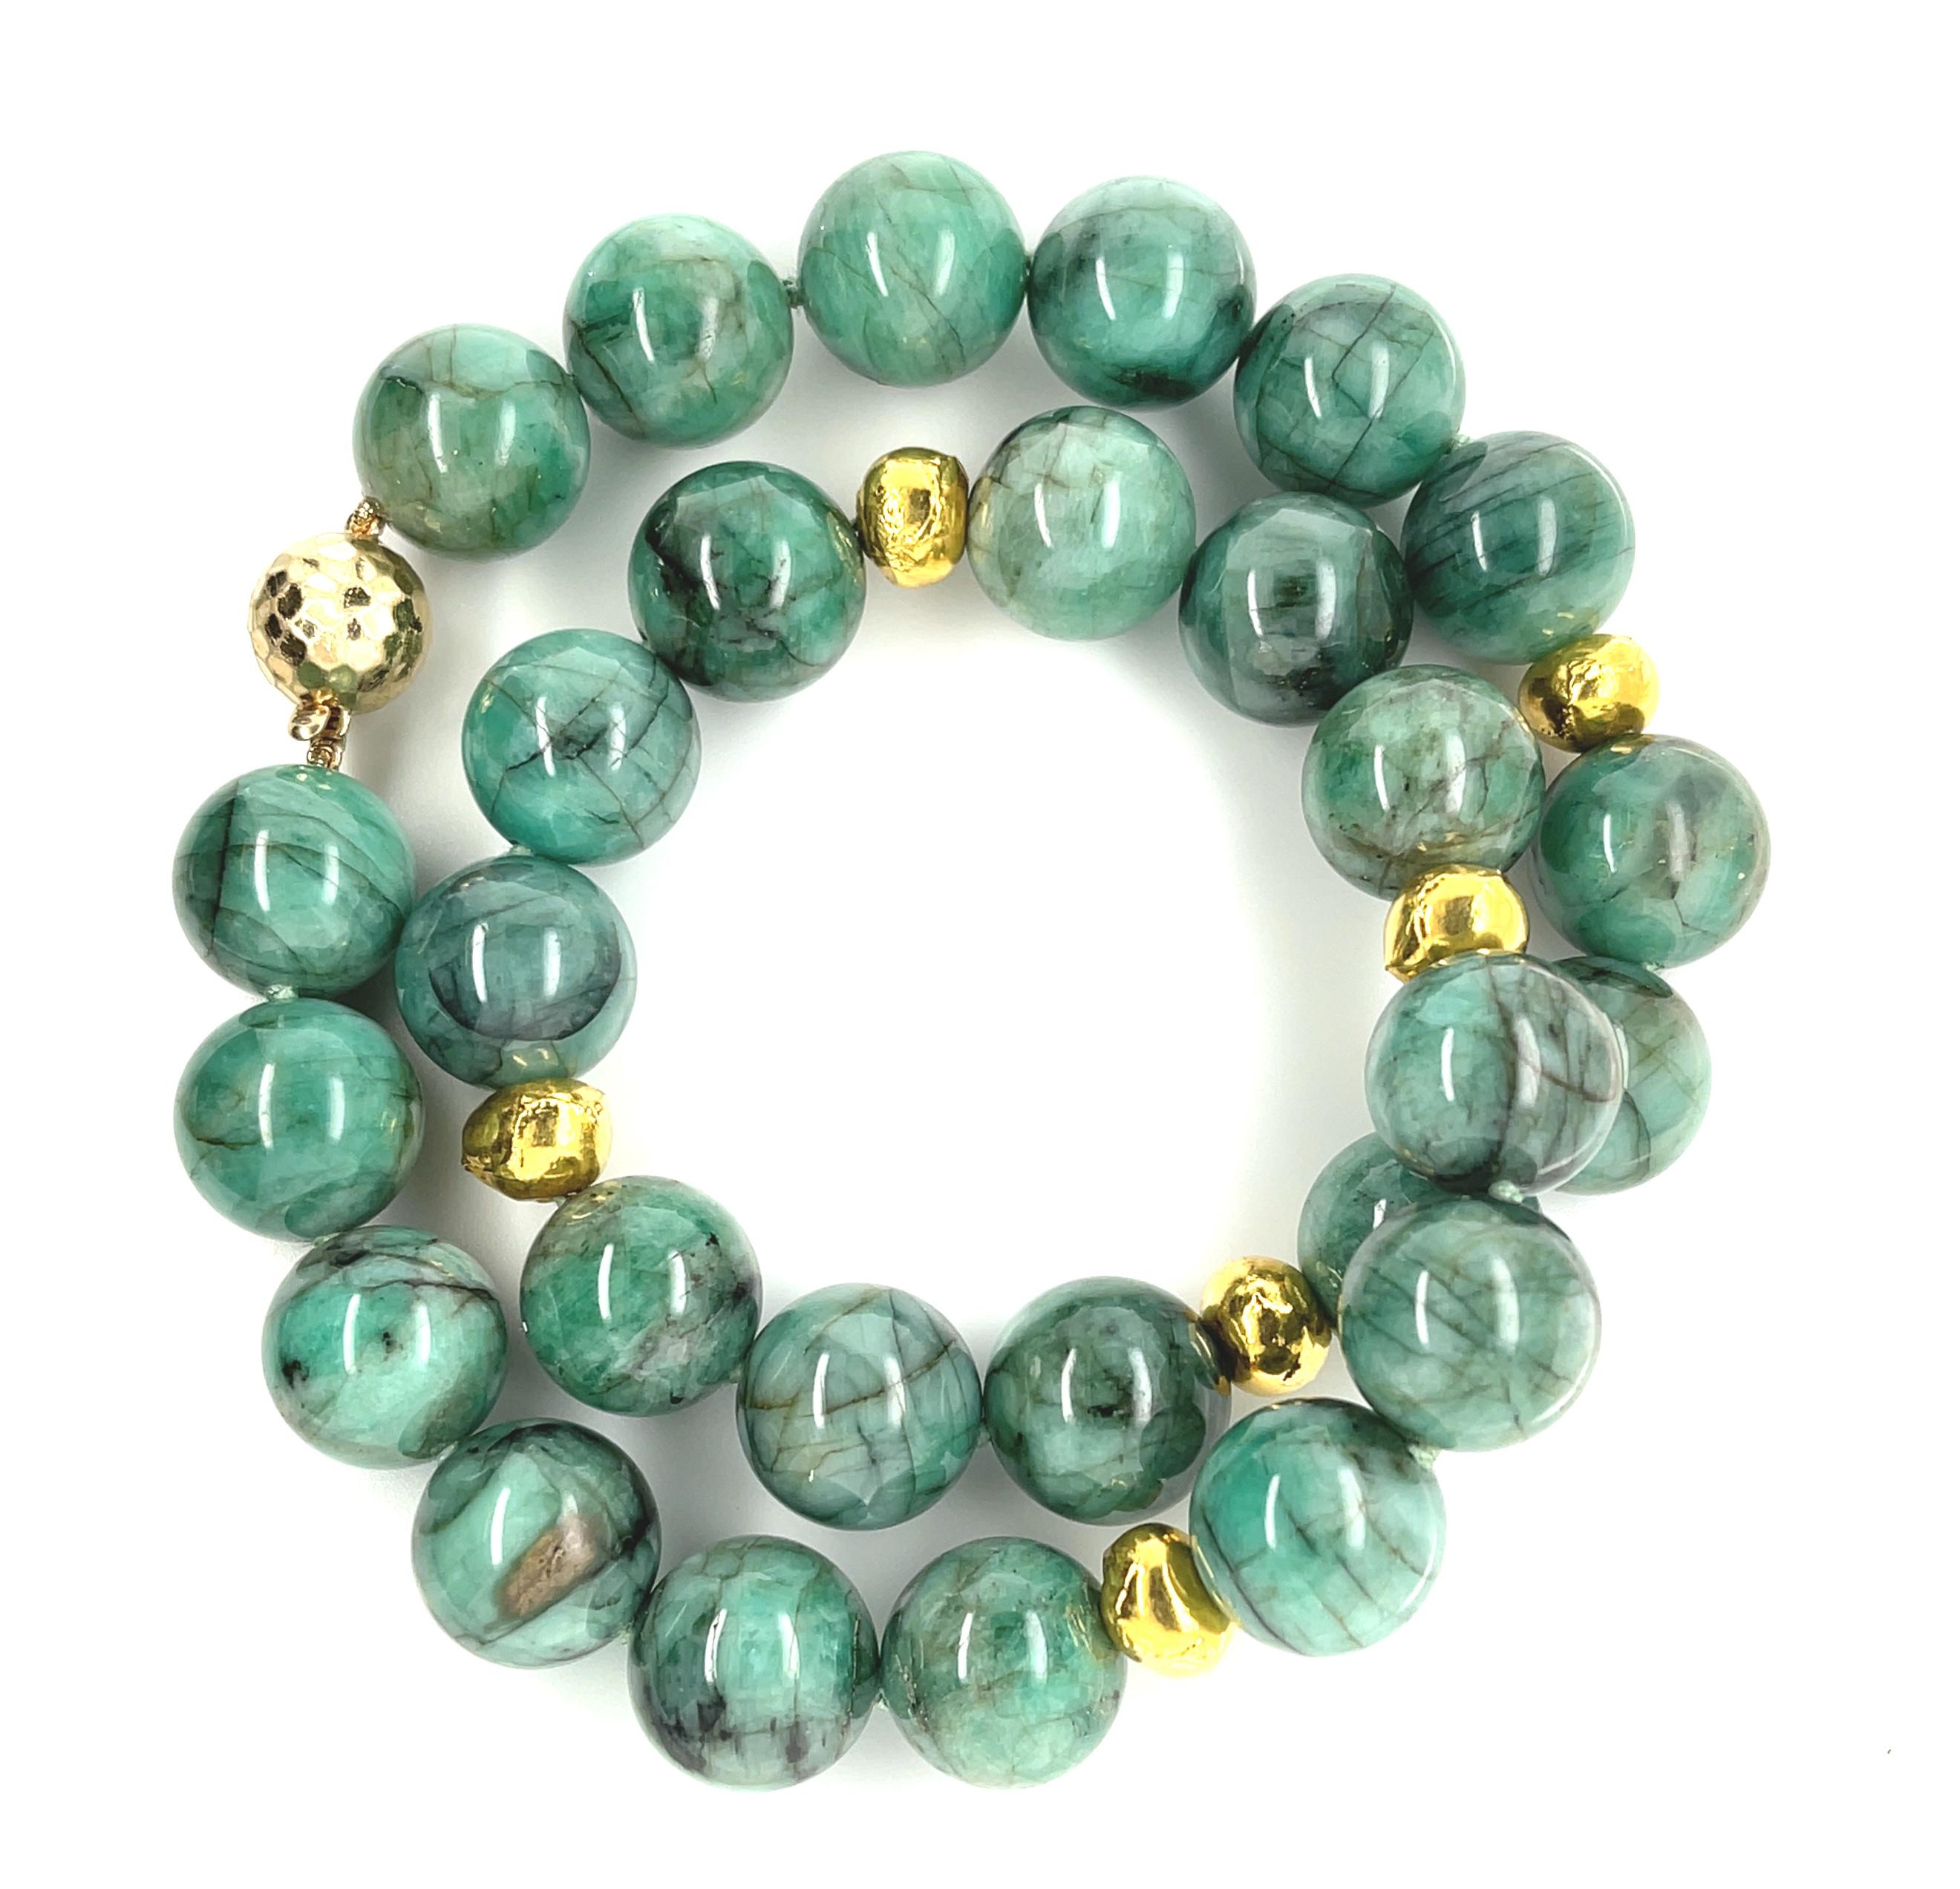 This impressive strand of emerald beads showcases a stunning combination of elegant green and bright yellow gold that is flattering to all complexions! The 15mm round emerald beads have beautiful black veining that gives the necklace a gorgeous